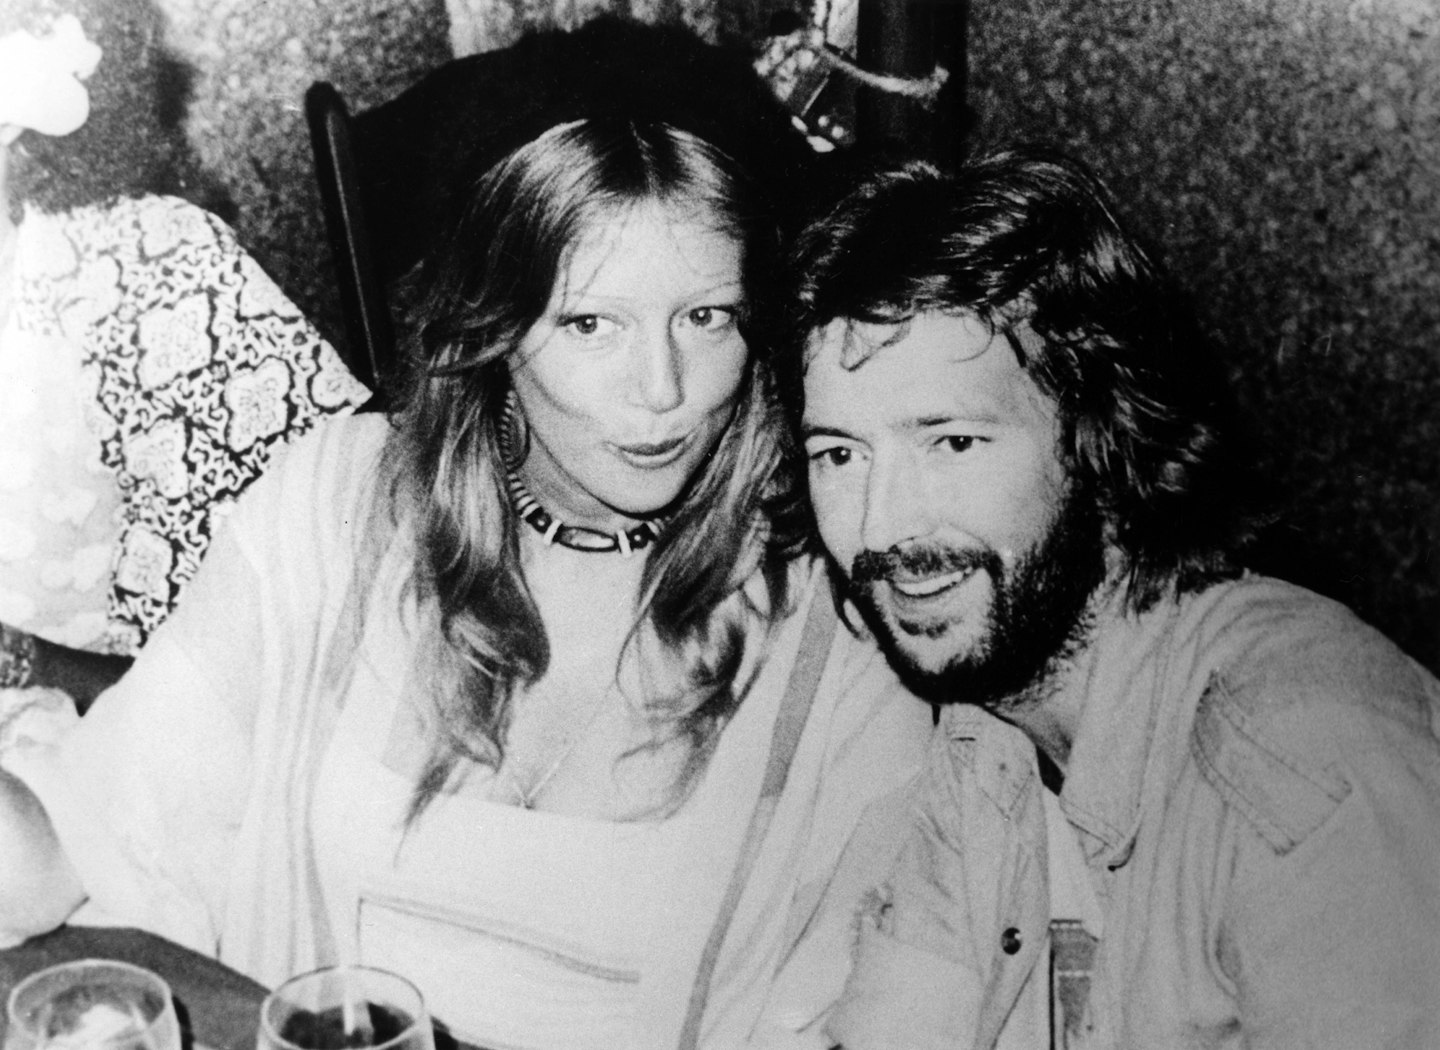 1979 – Eric Clapton and Pattie Boyd